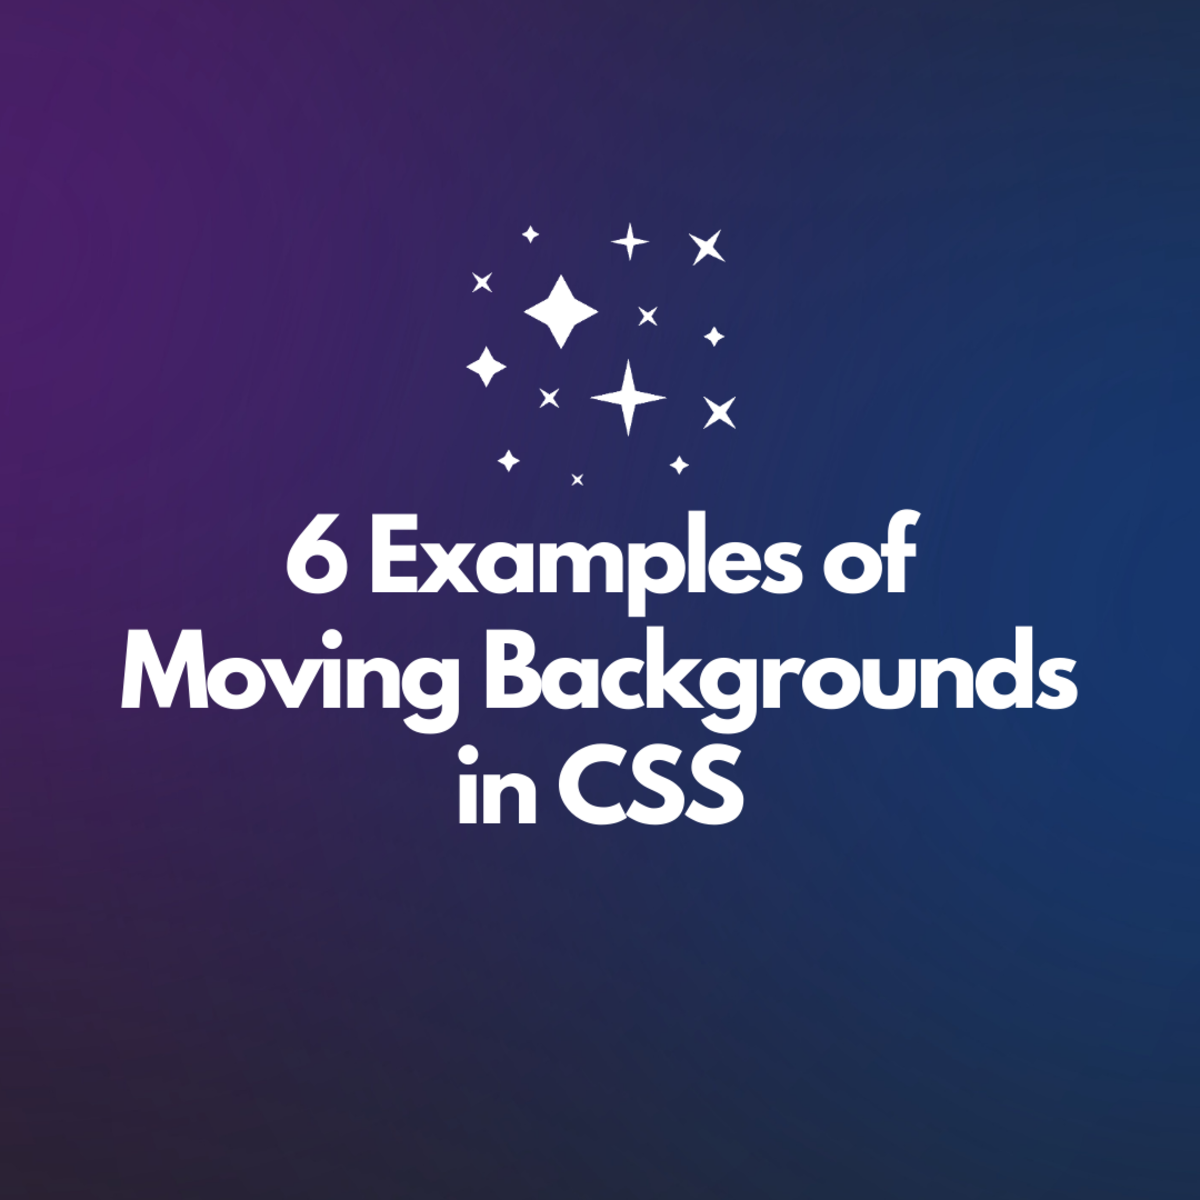 6 Stunning Examples of Moving Backgrounds in CSS